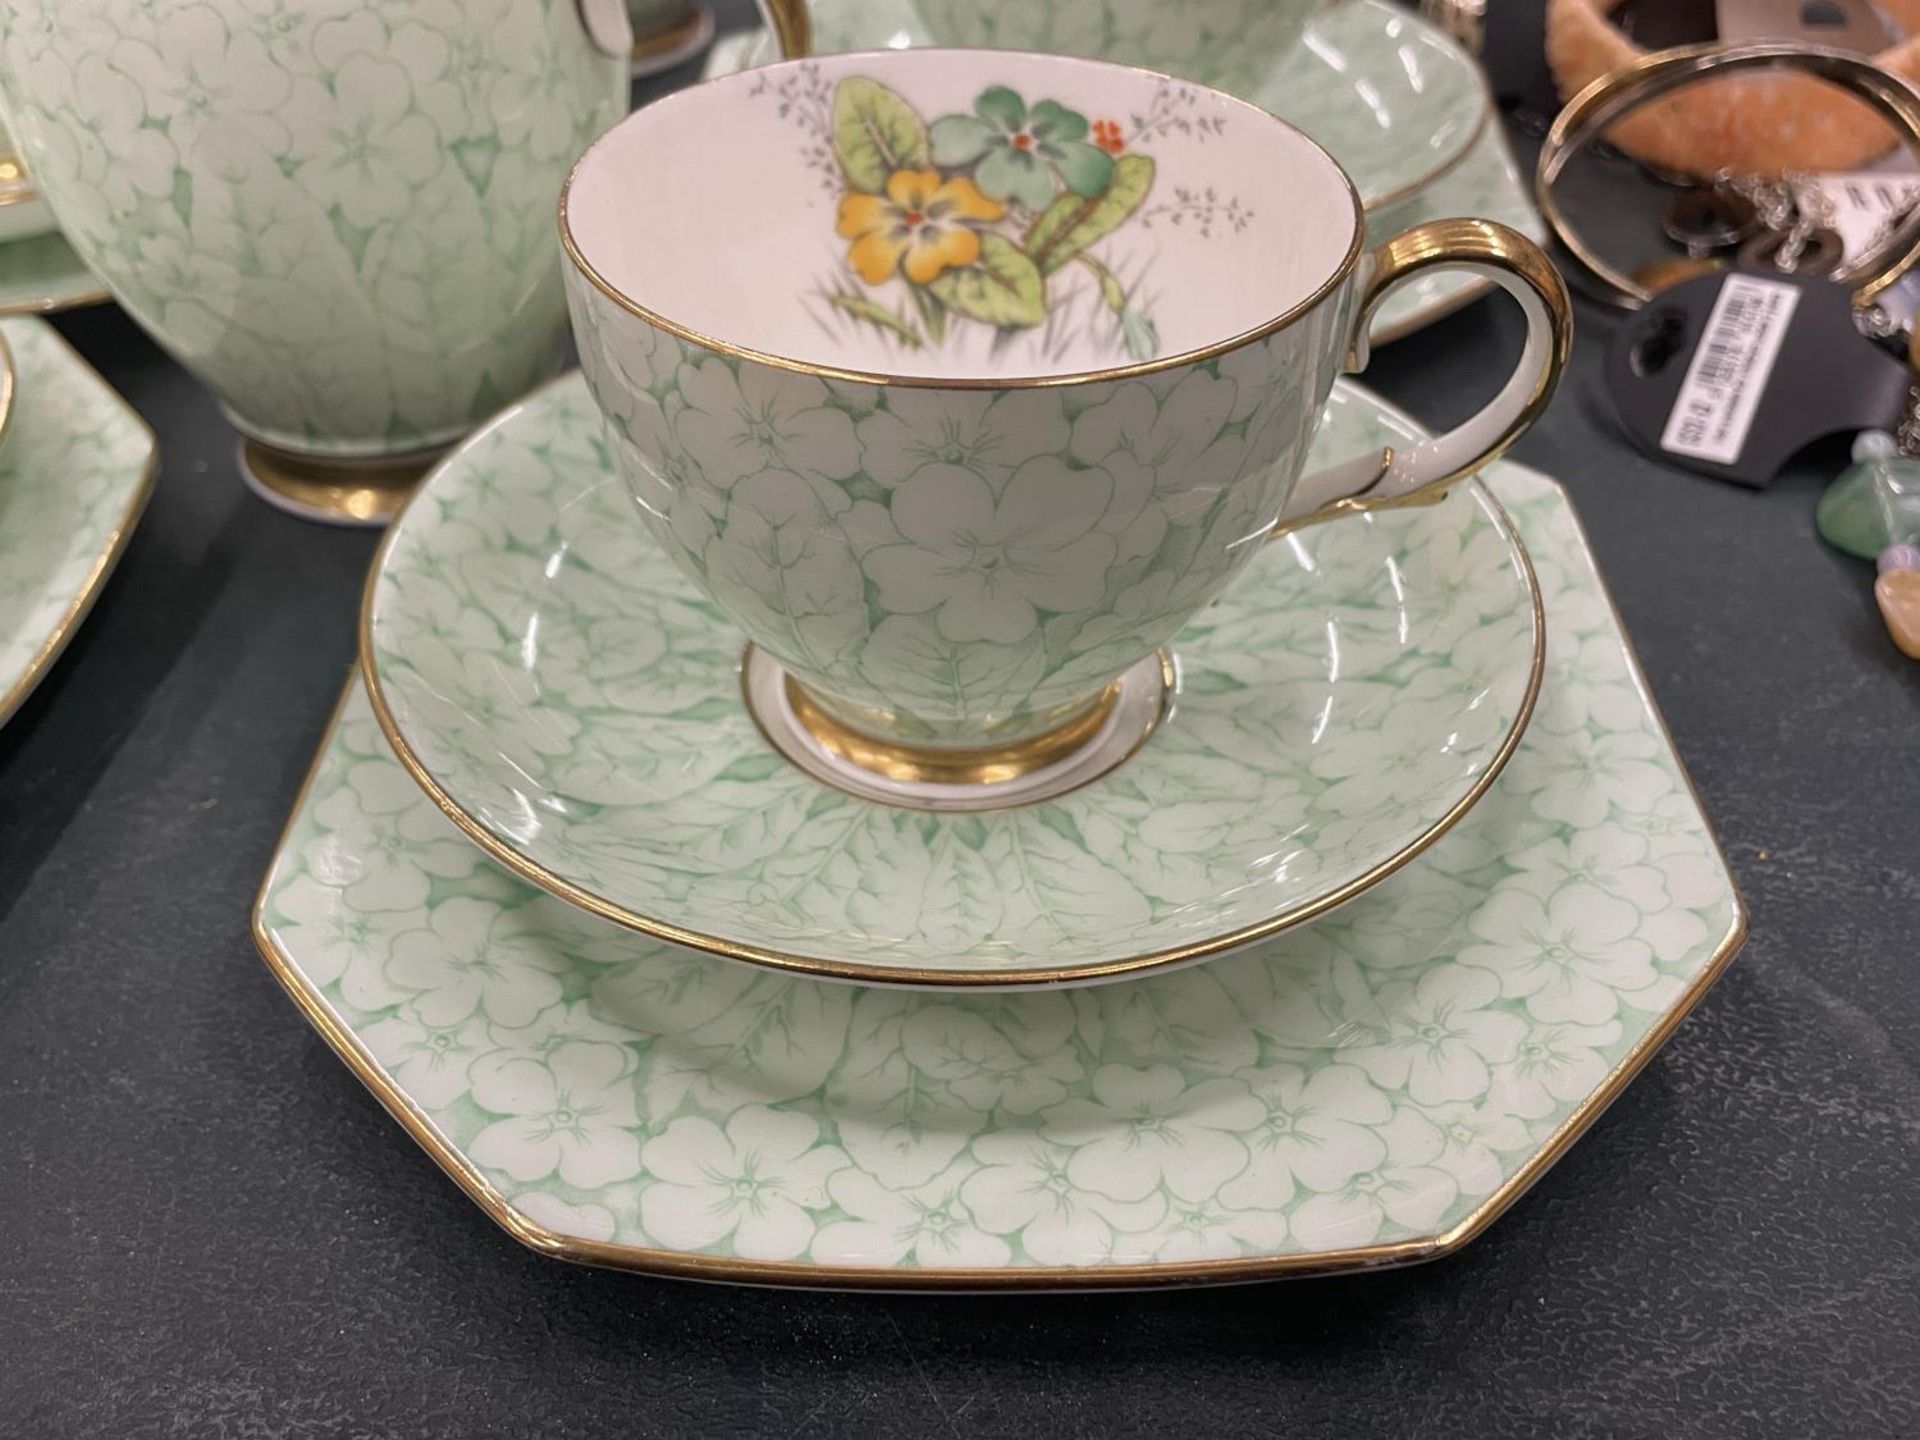 A VINTAGE PARAGON TEASET TO INCLUDE A CAKE PLATE, CREAM JUG, SUGAR BOWL, CUPS SAUCERS AND SIDE - Image 2 of 5